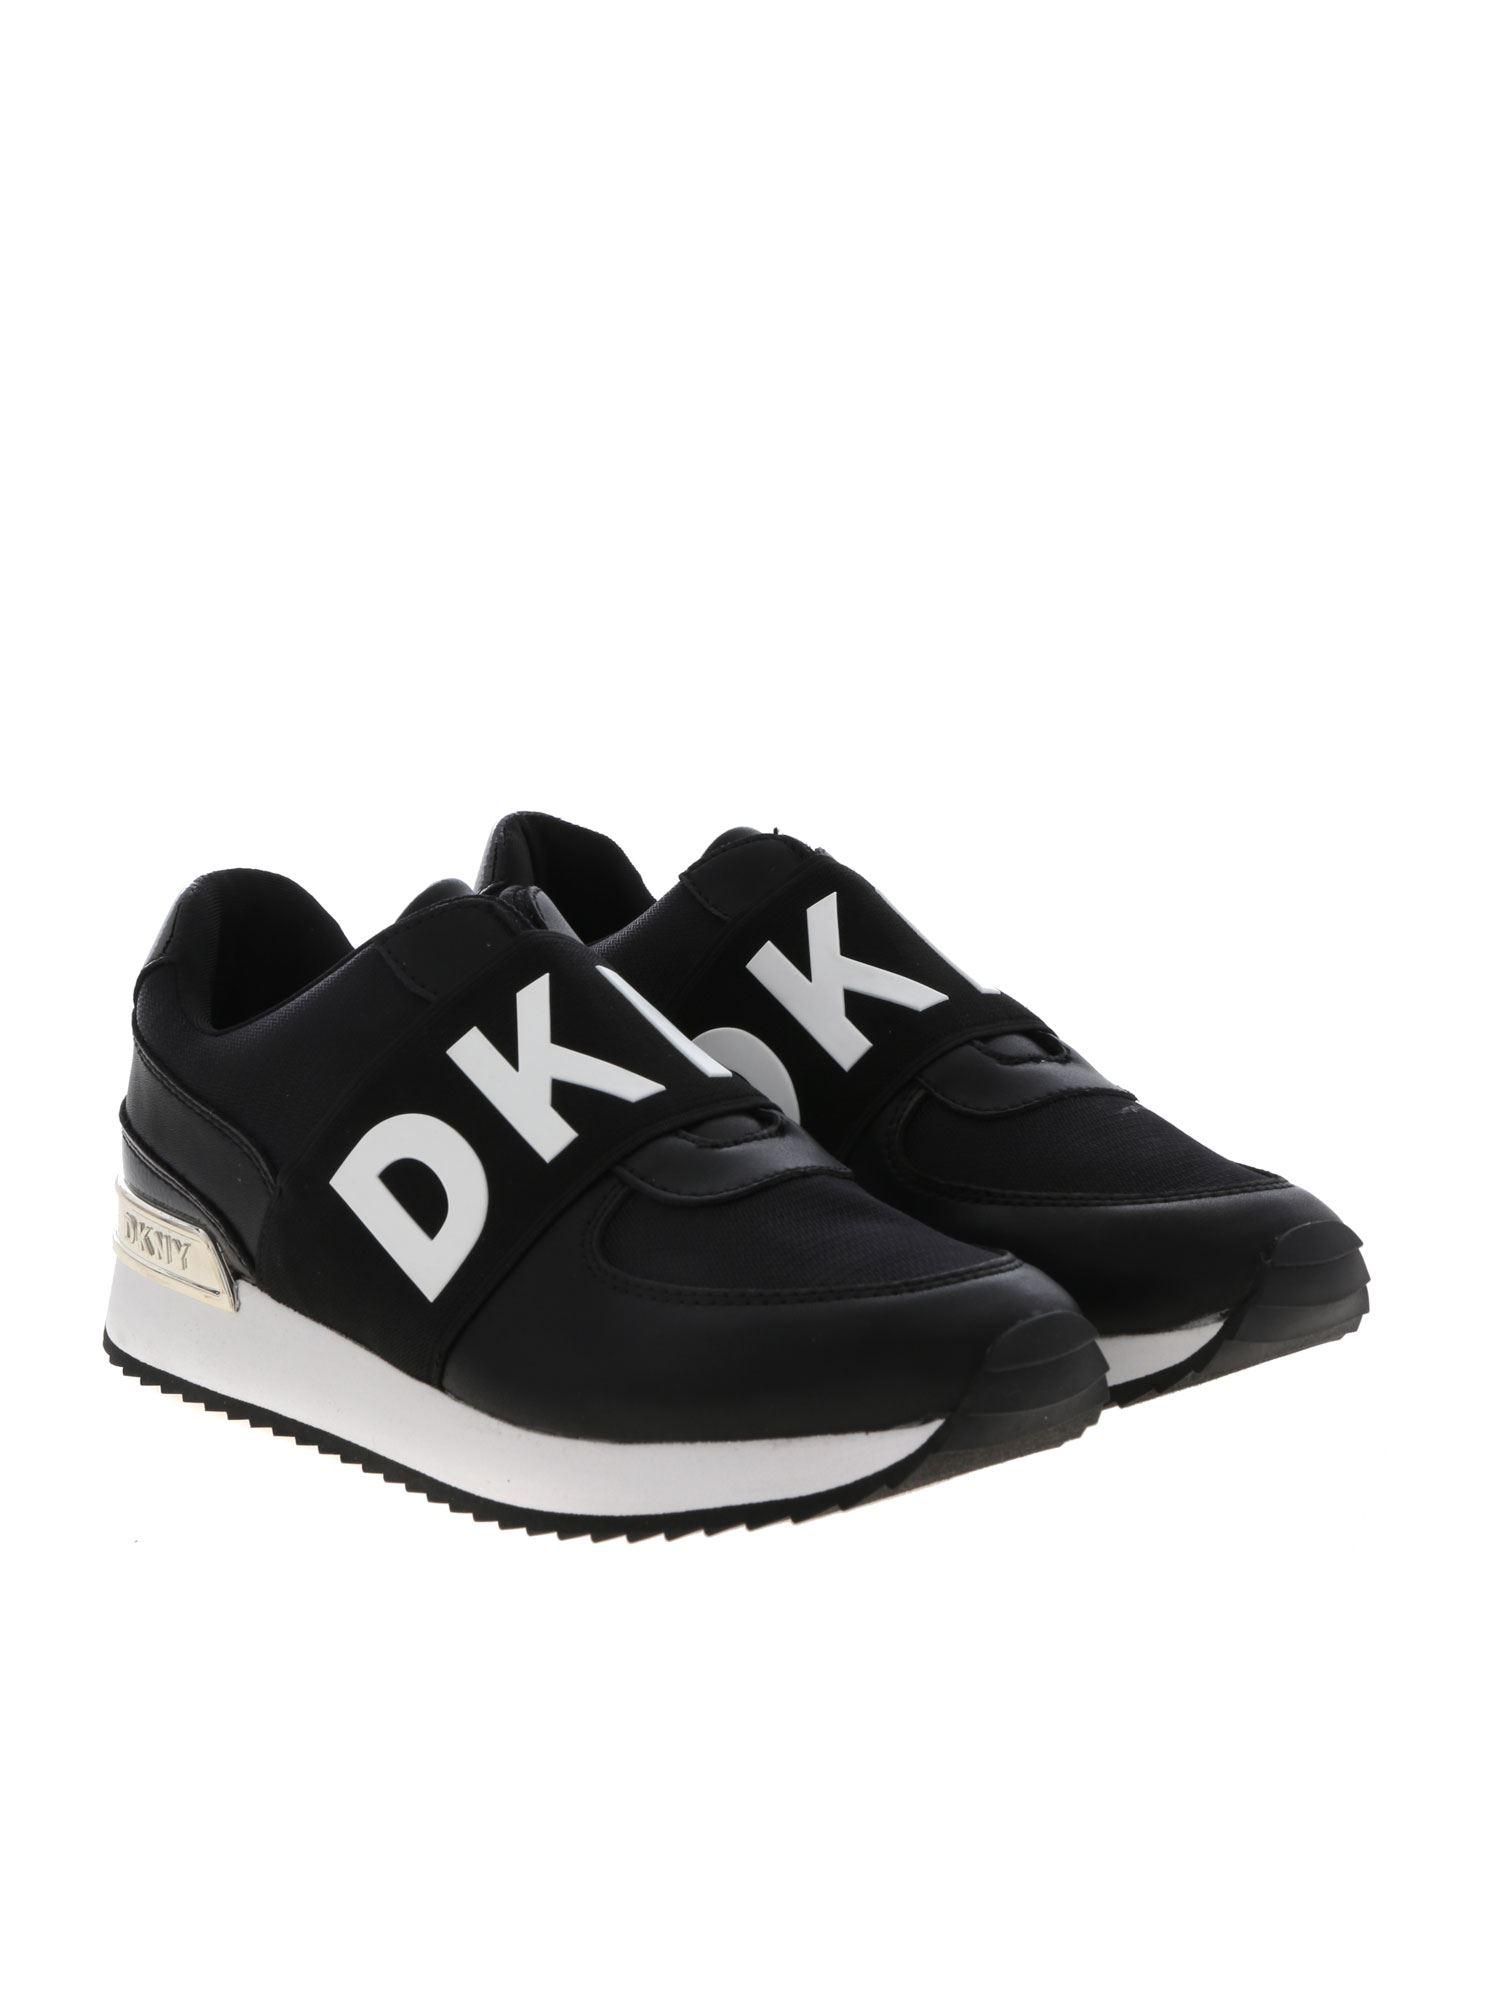 black dkny sneakers,Quality assurance,protein-burger.com